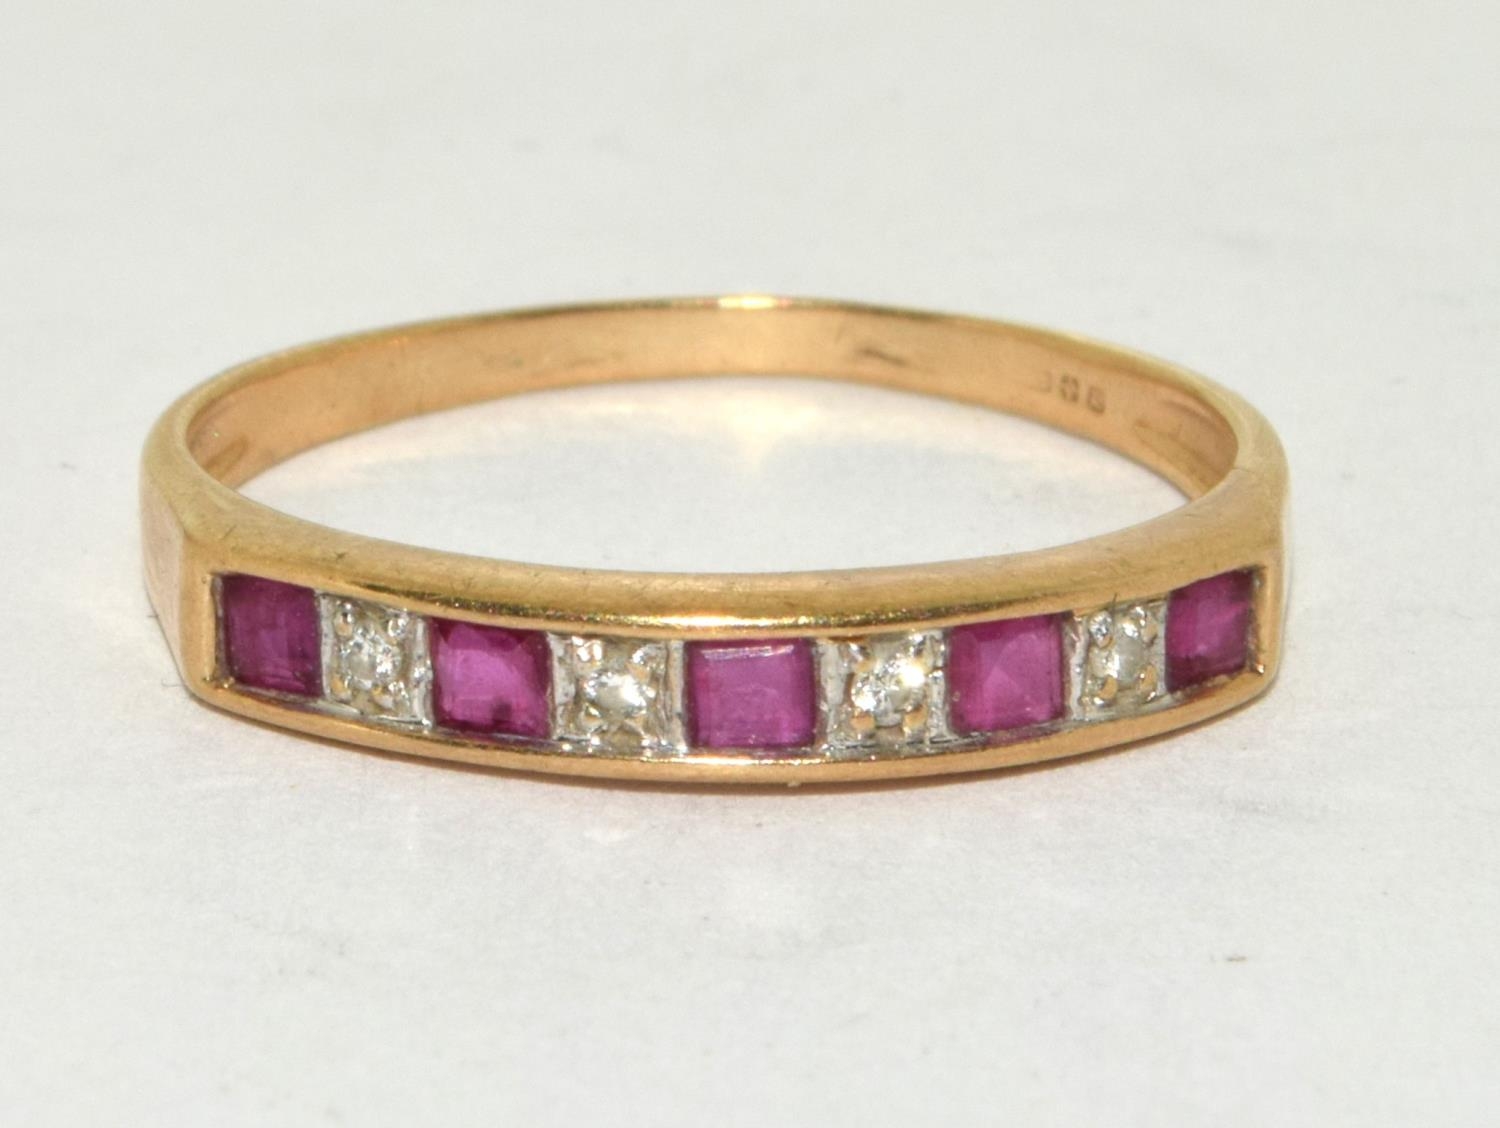 9ct gold ladies Ruby and Diamond 1/2 eternity ring size R